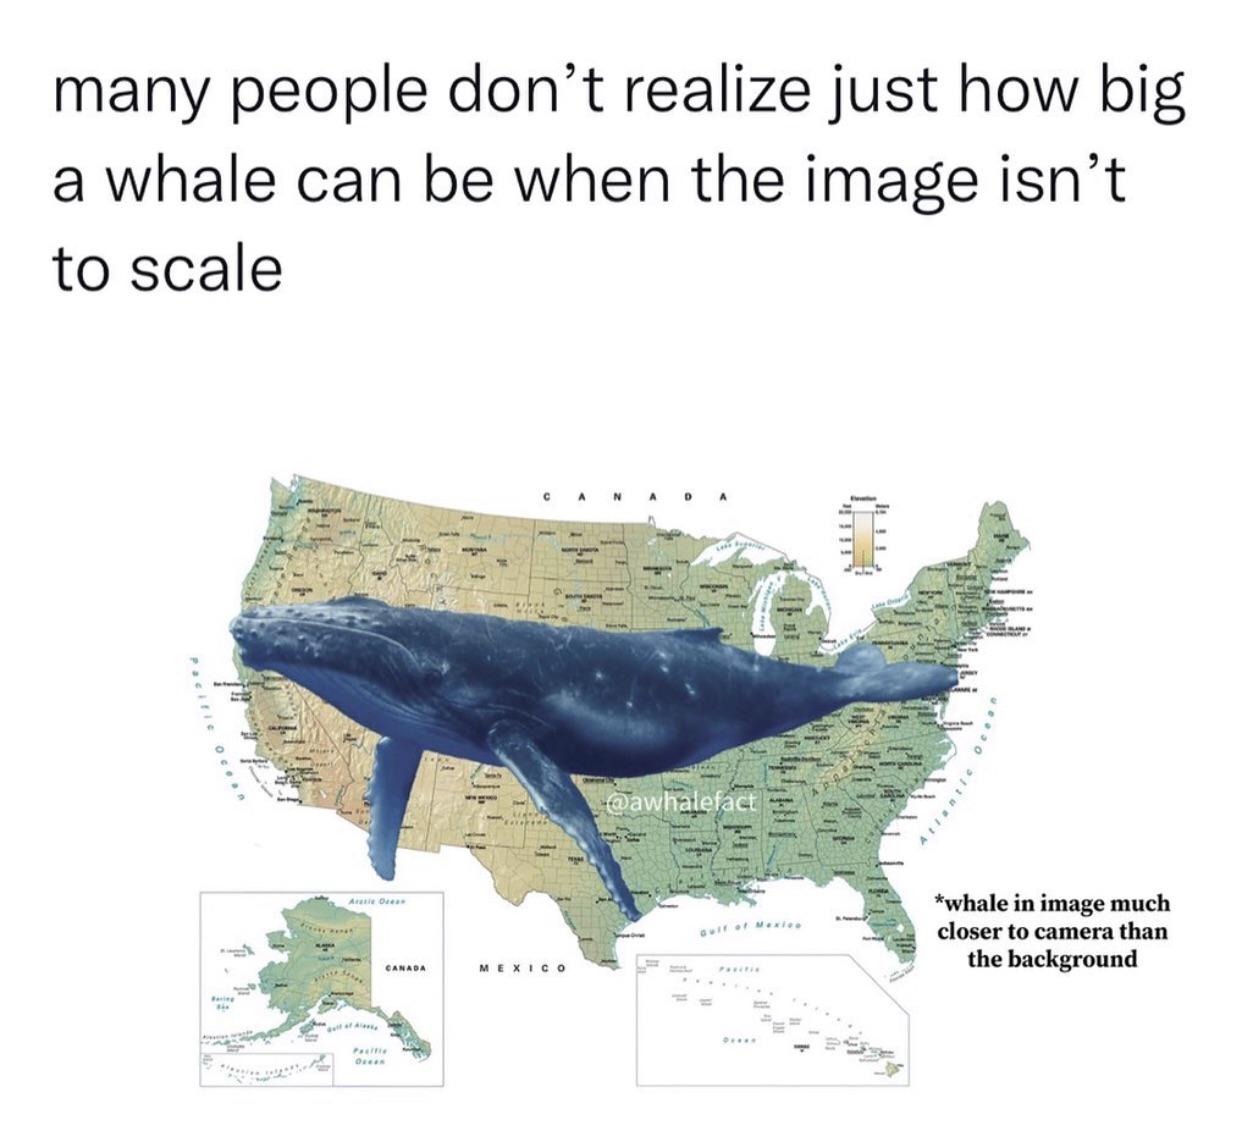 funny memes - dank memes - alaska map - many people don't realize just how big a whale can be when the image isn't to scale N D cean Aratic Ocea ex Ocean Canada Mexico Atla tic whale in image much closer to camera than the background